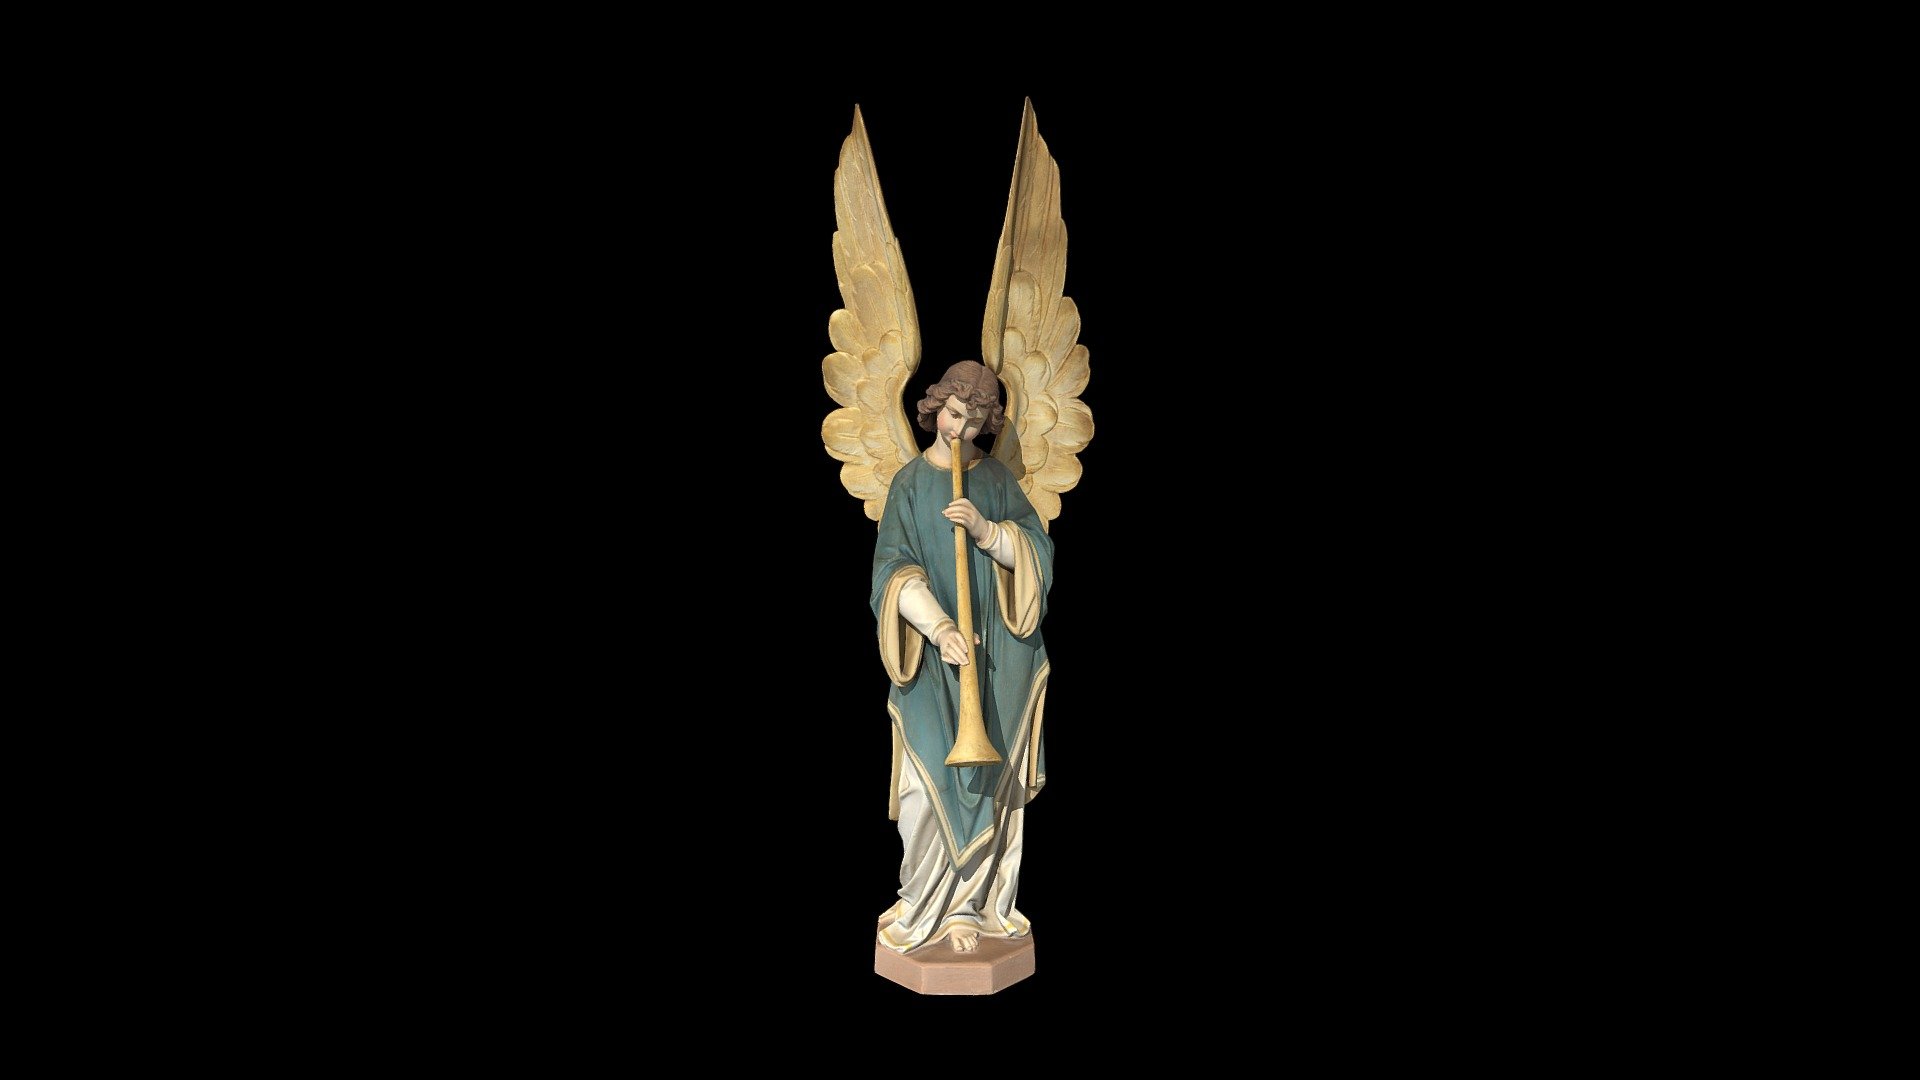 Wooden angel sculpture by the Hackner Religious Art Company, La Crosse, Wisconsin. Originally installed in the St. Joseph Cathedral in La Crosse. Removed in 1957(?) prior to demolition. Currrently in the collections of the Cathedral of St Joseph the Workman in La Crosse.

Created from 479 photographs (Canon EOS T8i) using Metashape 1.8.4 3d model